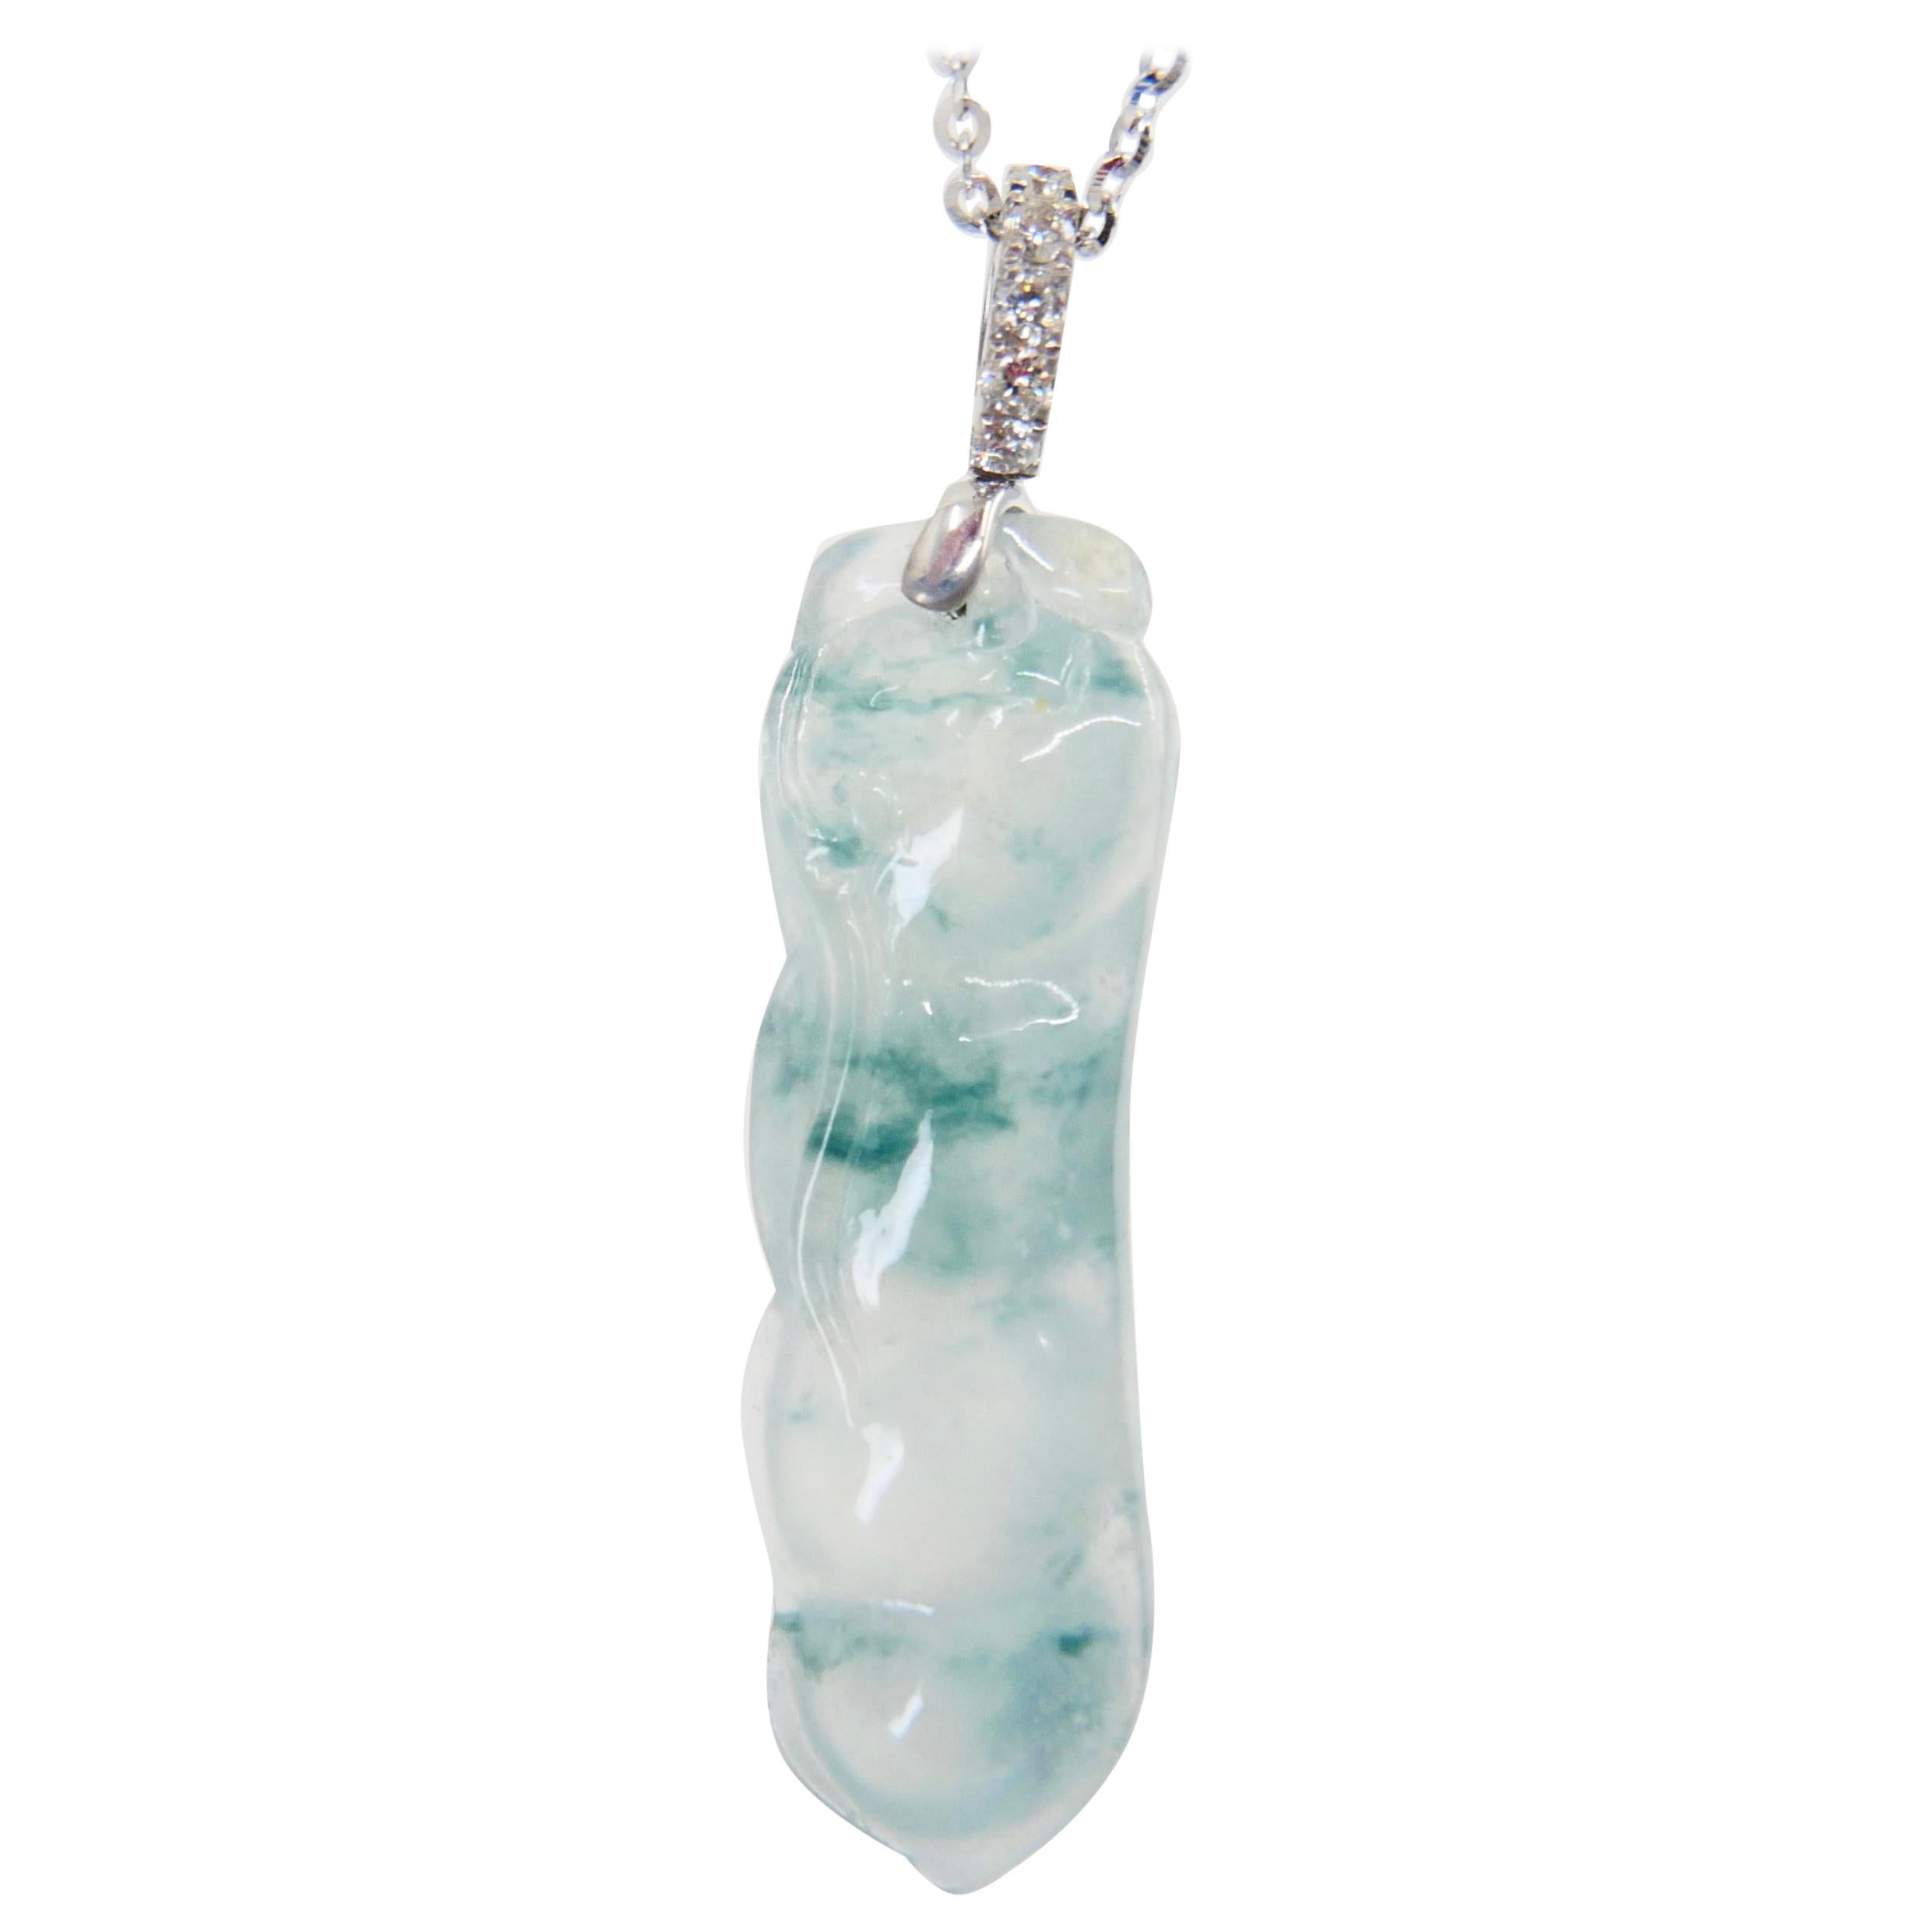 Certified Type A Icy Peapod Jade and Diamond Drop Necklace Pendant, Green Veins